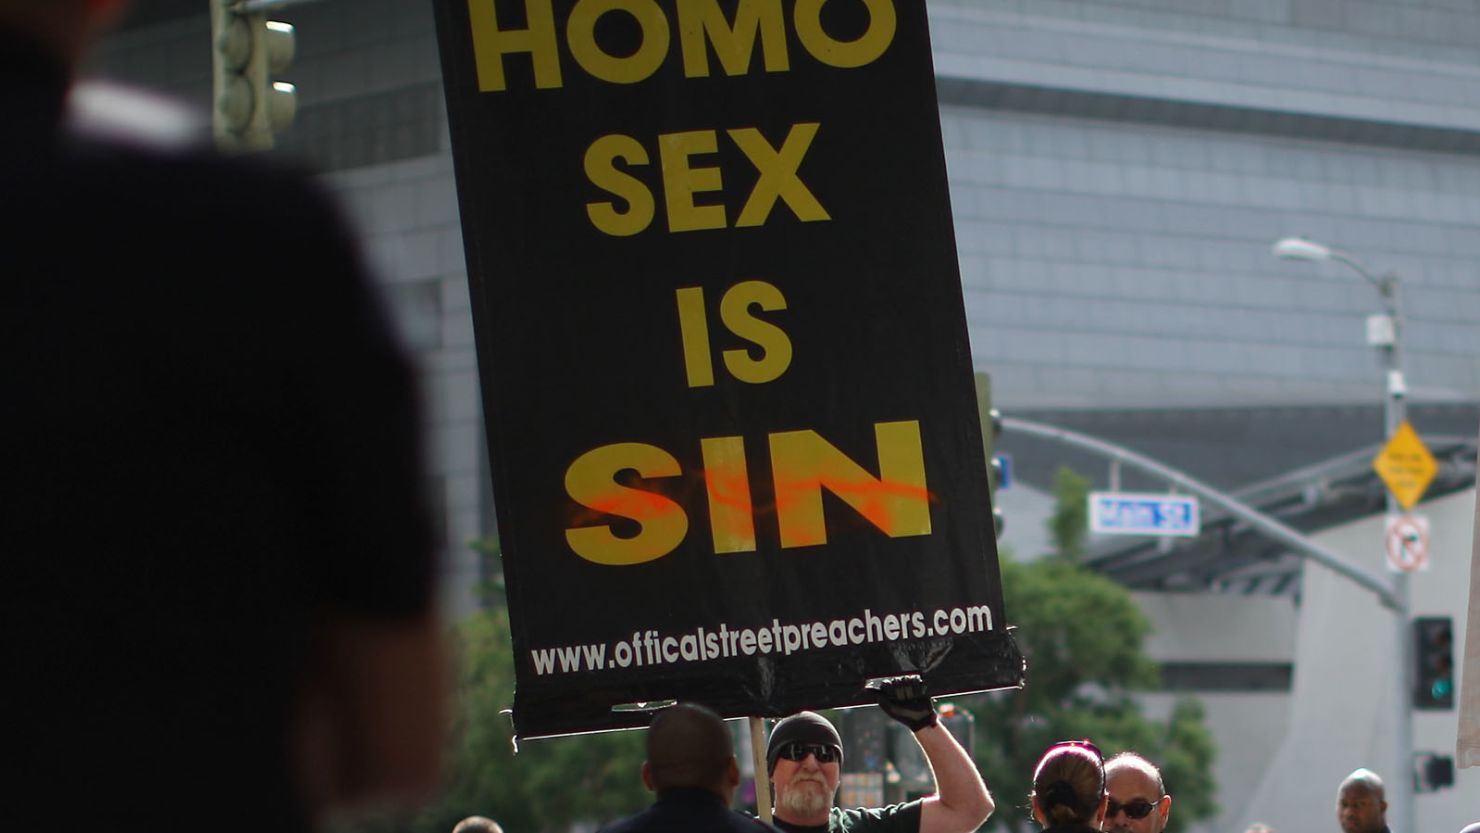 A group called Bible Believers express views at a 2011 demonstration in Los Angeles. 